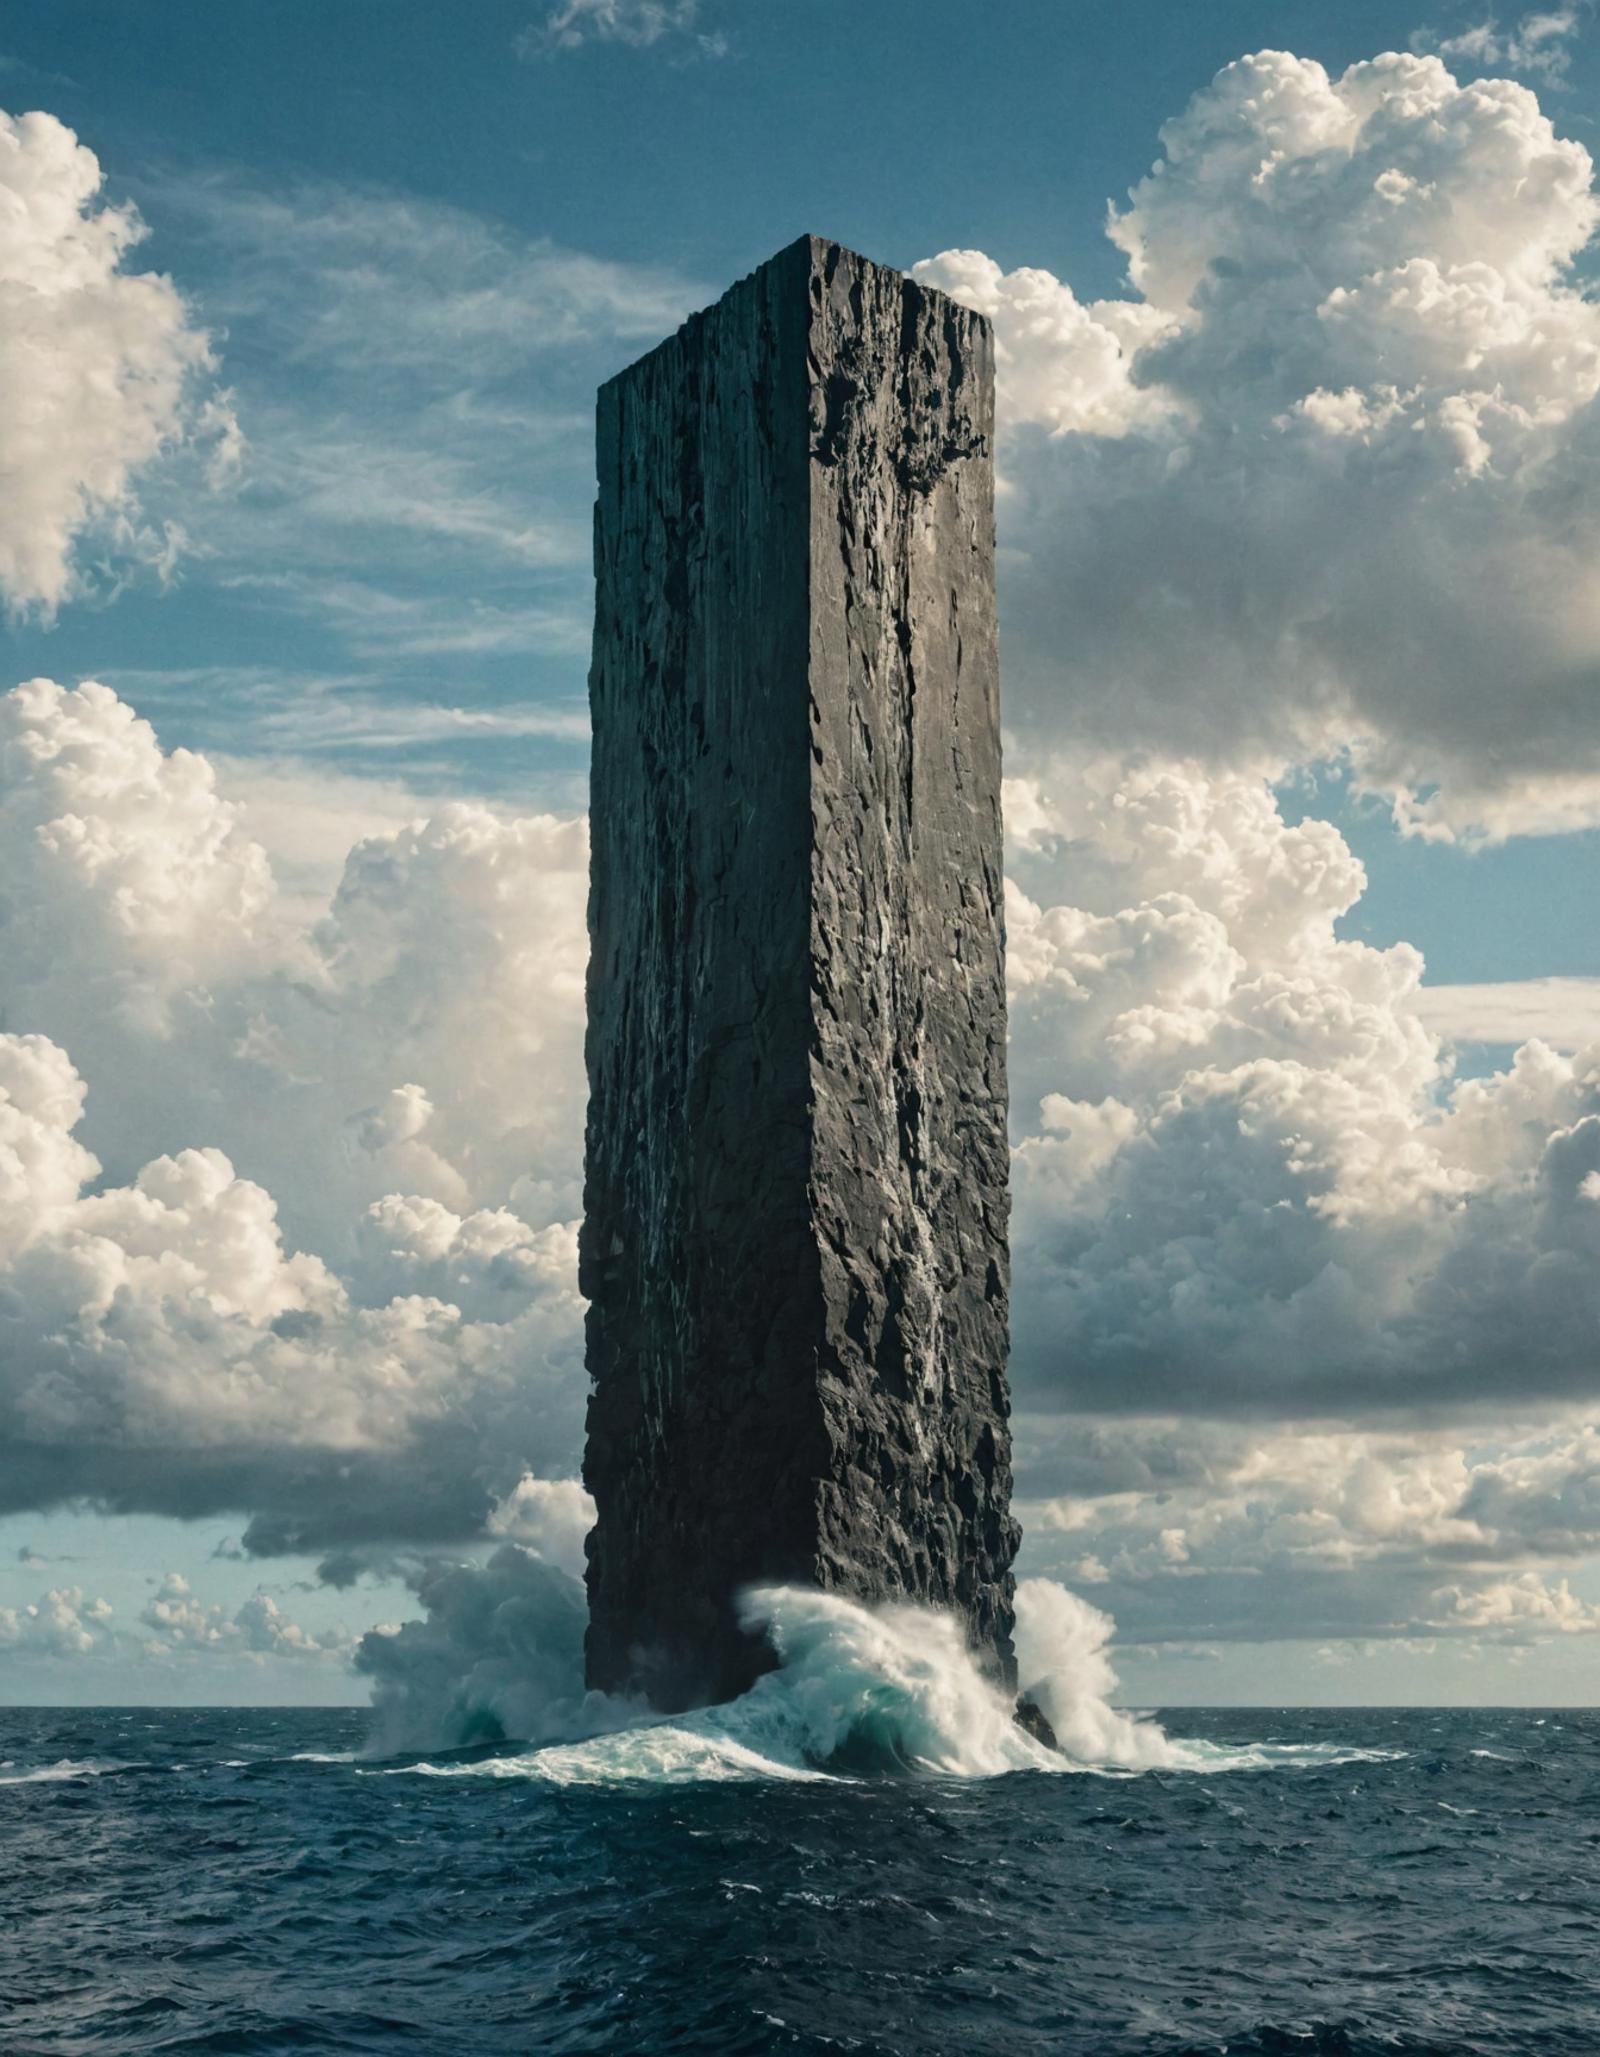 A tall rocky structure towering over the ocean with waves crashing around it.